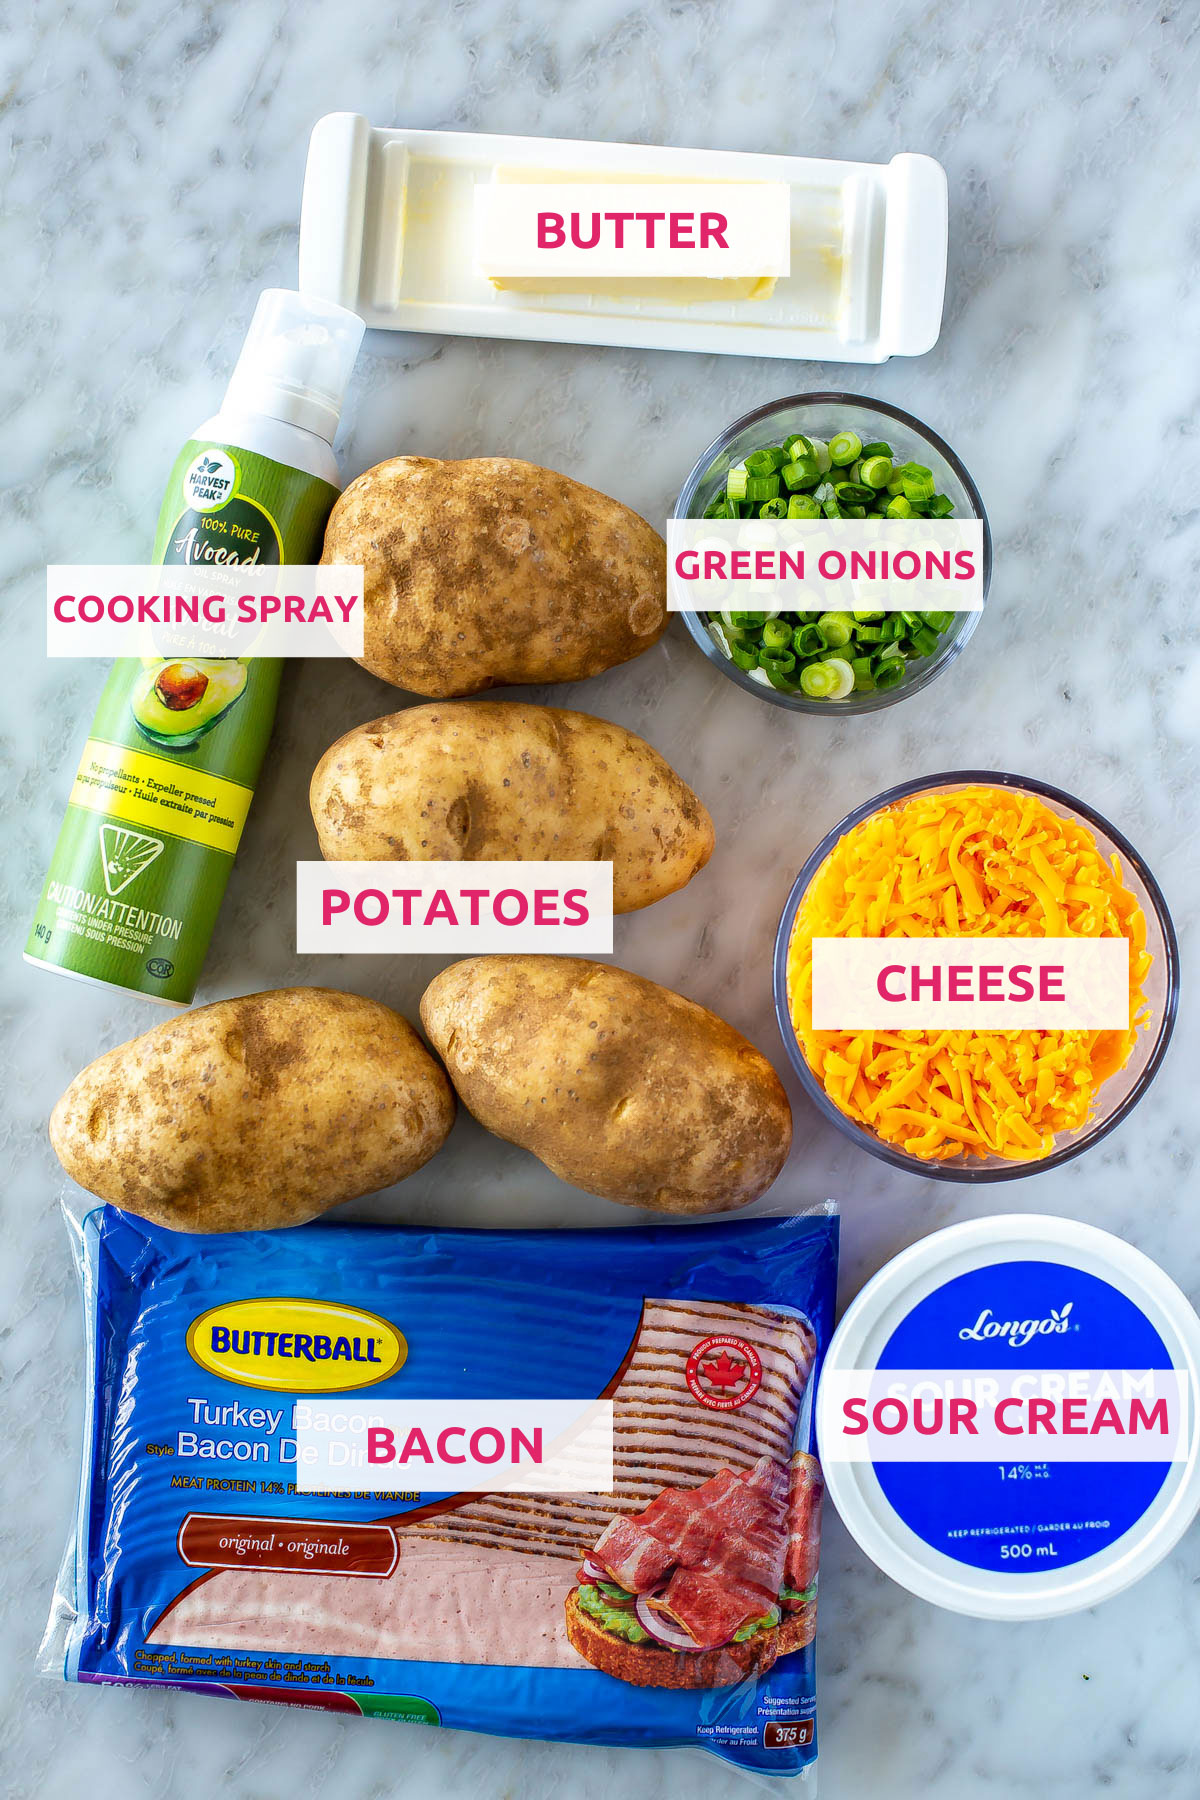 Ingredients for air fryer baked potatoes: potatoes, butter, cooking spray, green onions, cheese, bacon and sour cream.